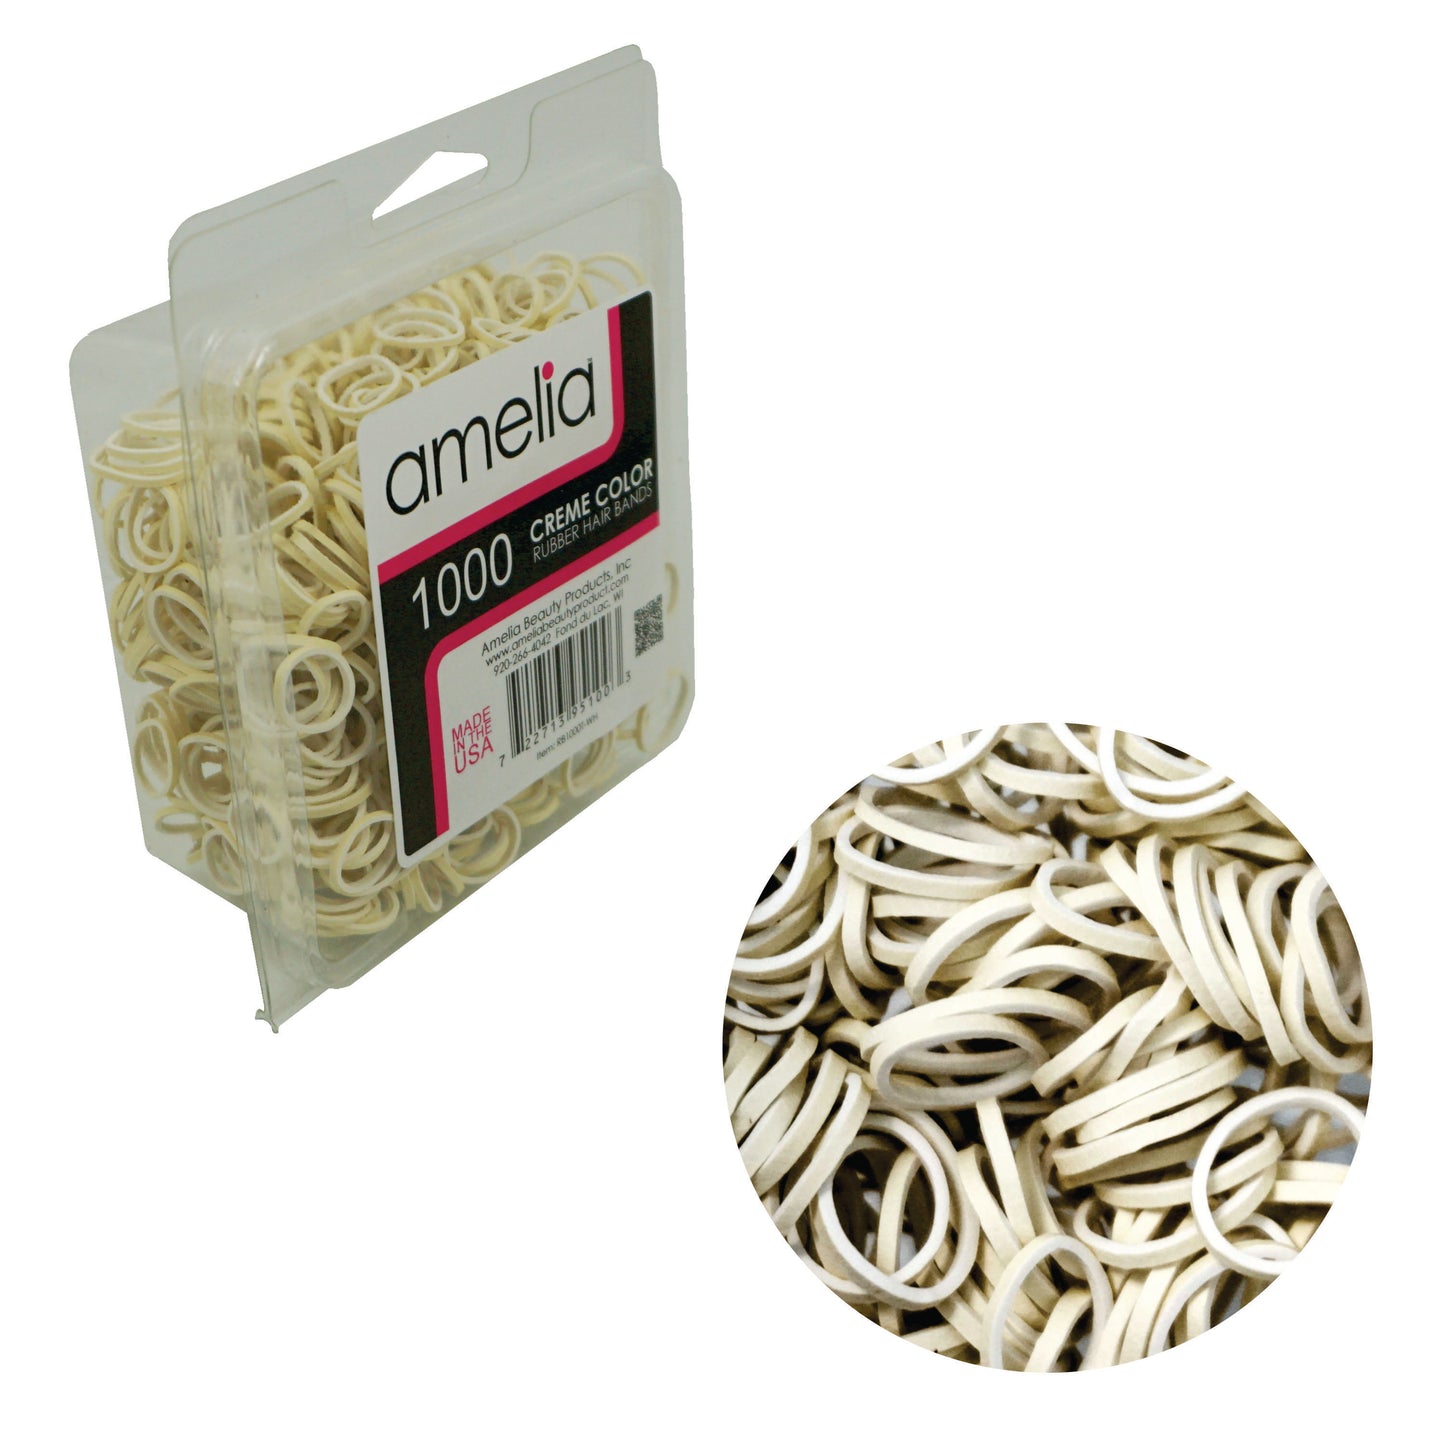 Amelia Beauty, 500 Count 1/2 Rubber Bands